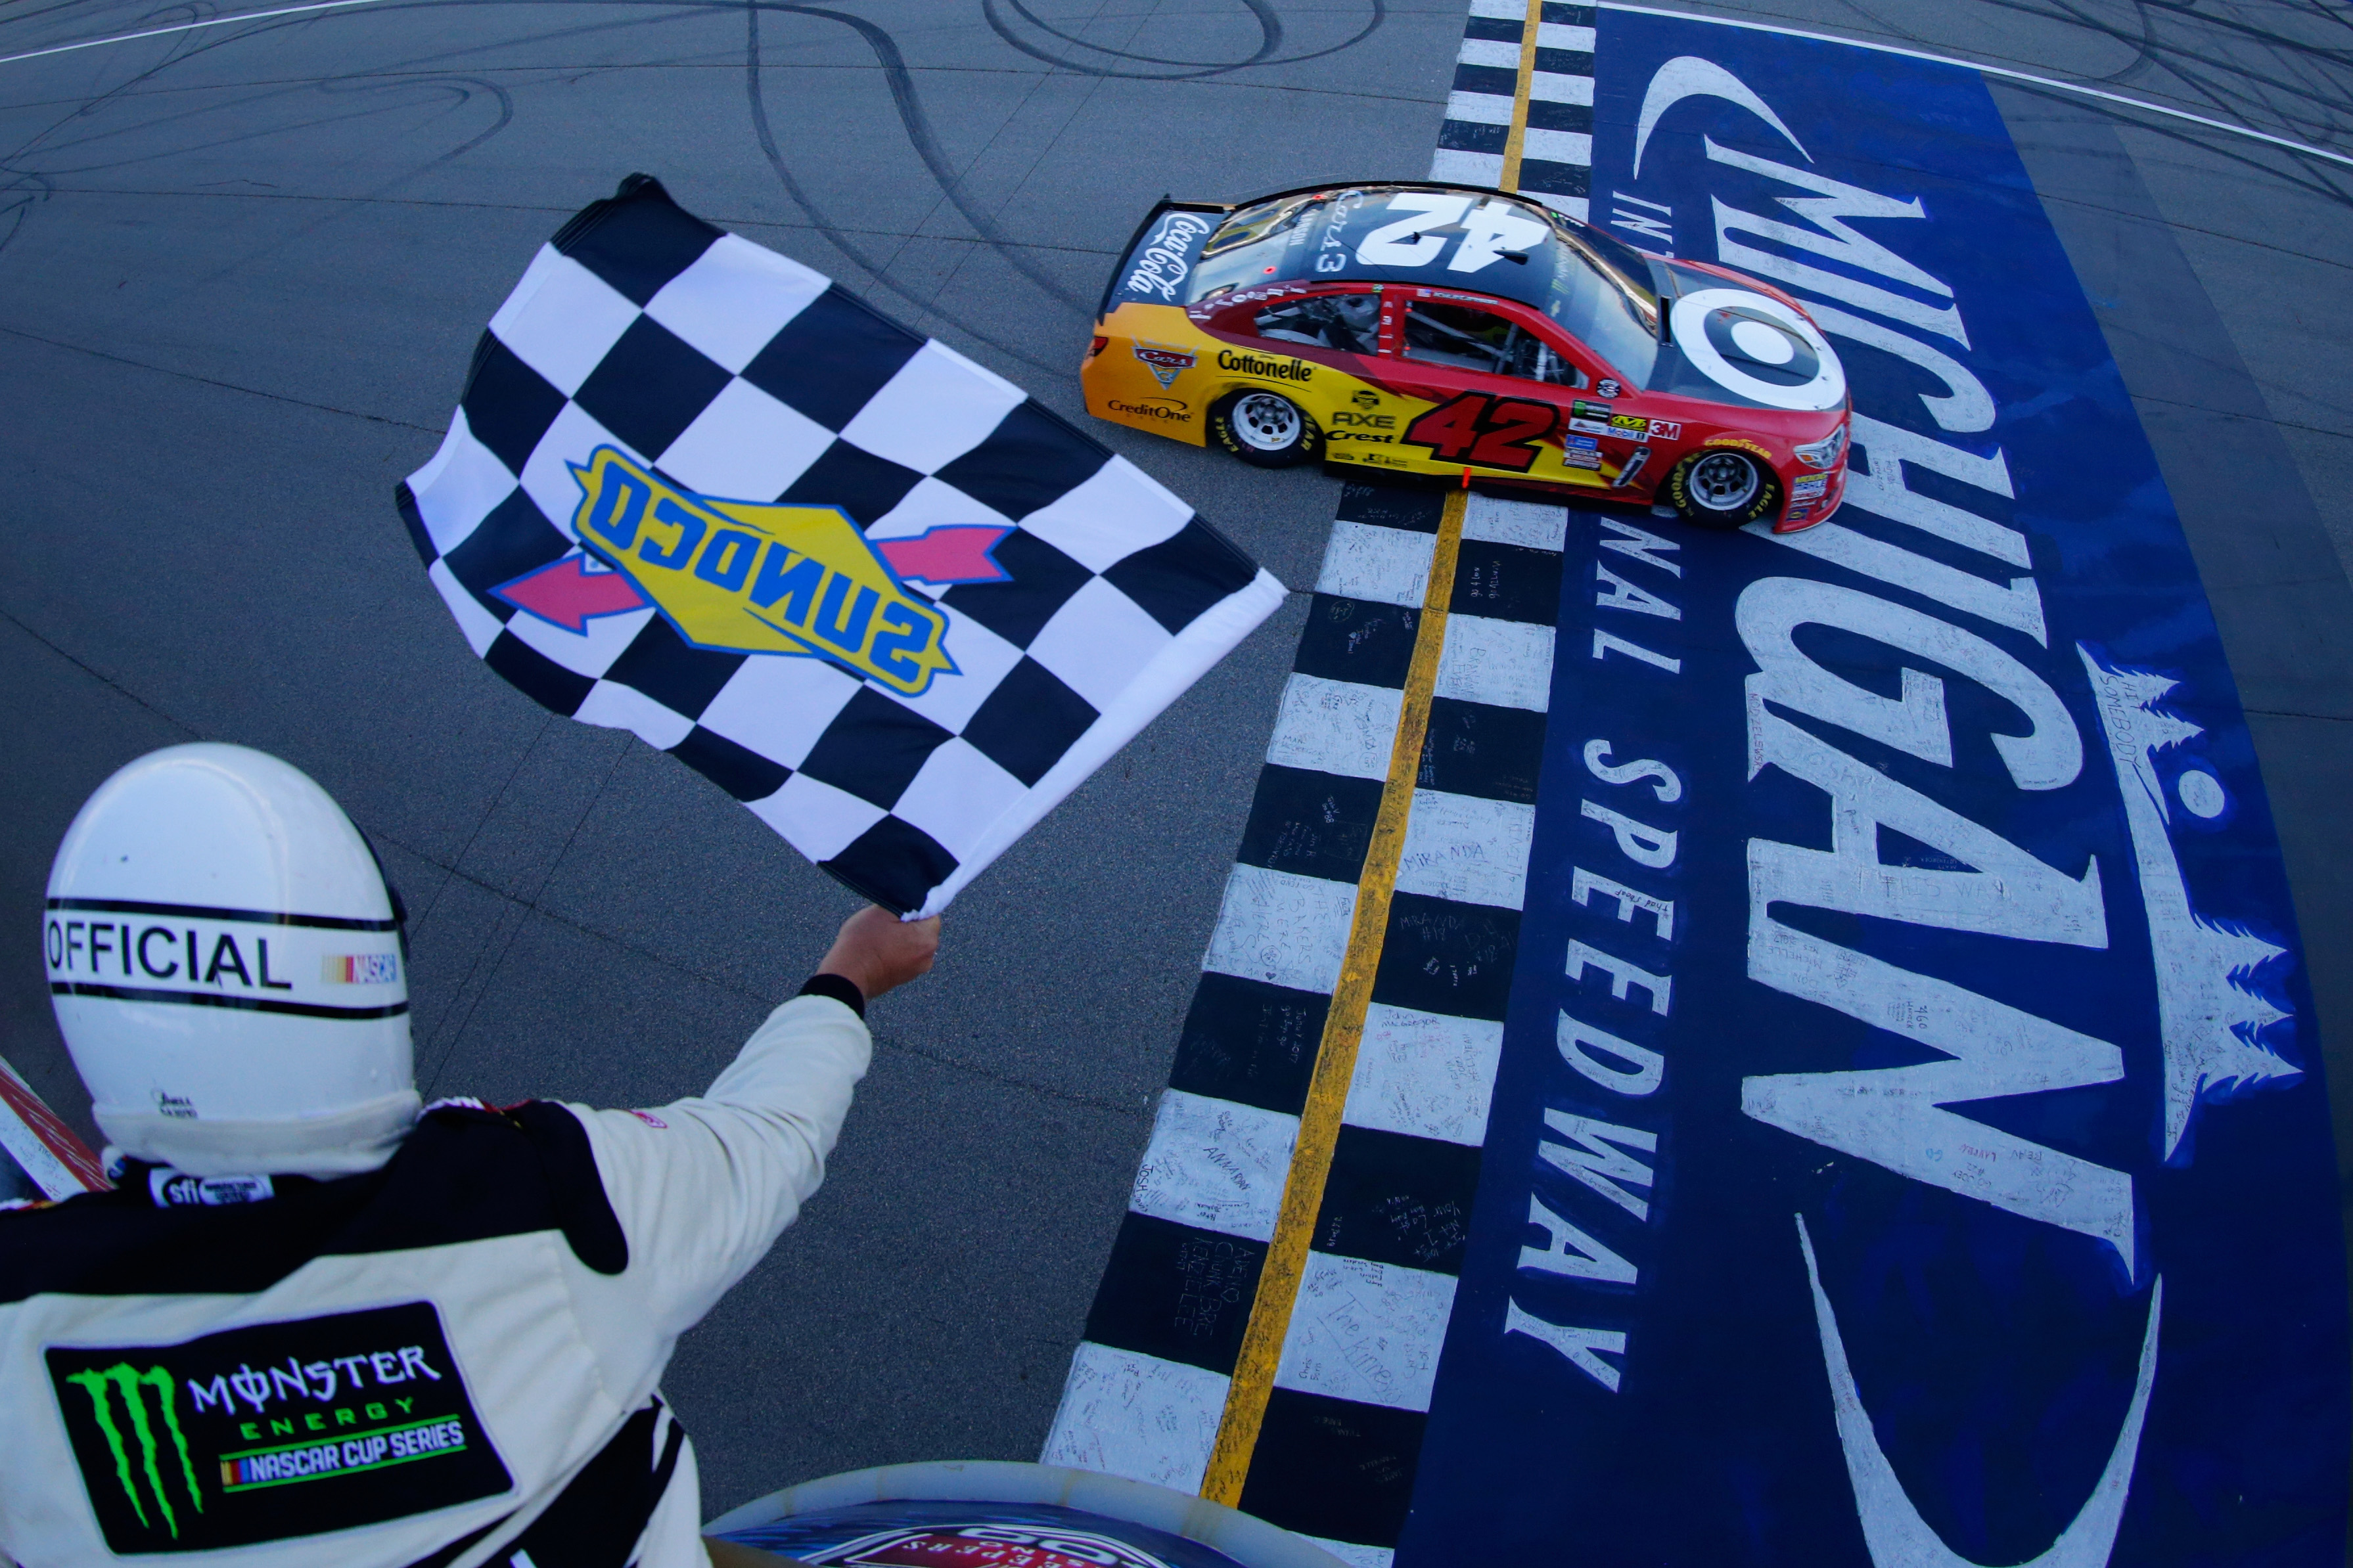 Lightning McQueen, or in this case Kyle Larson, gets the win at Michigan.